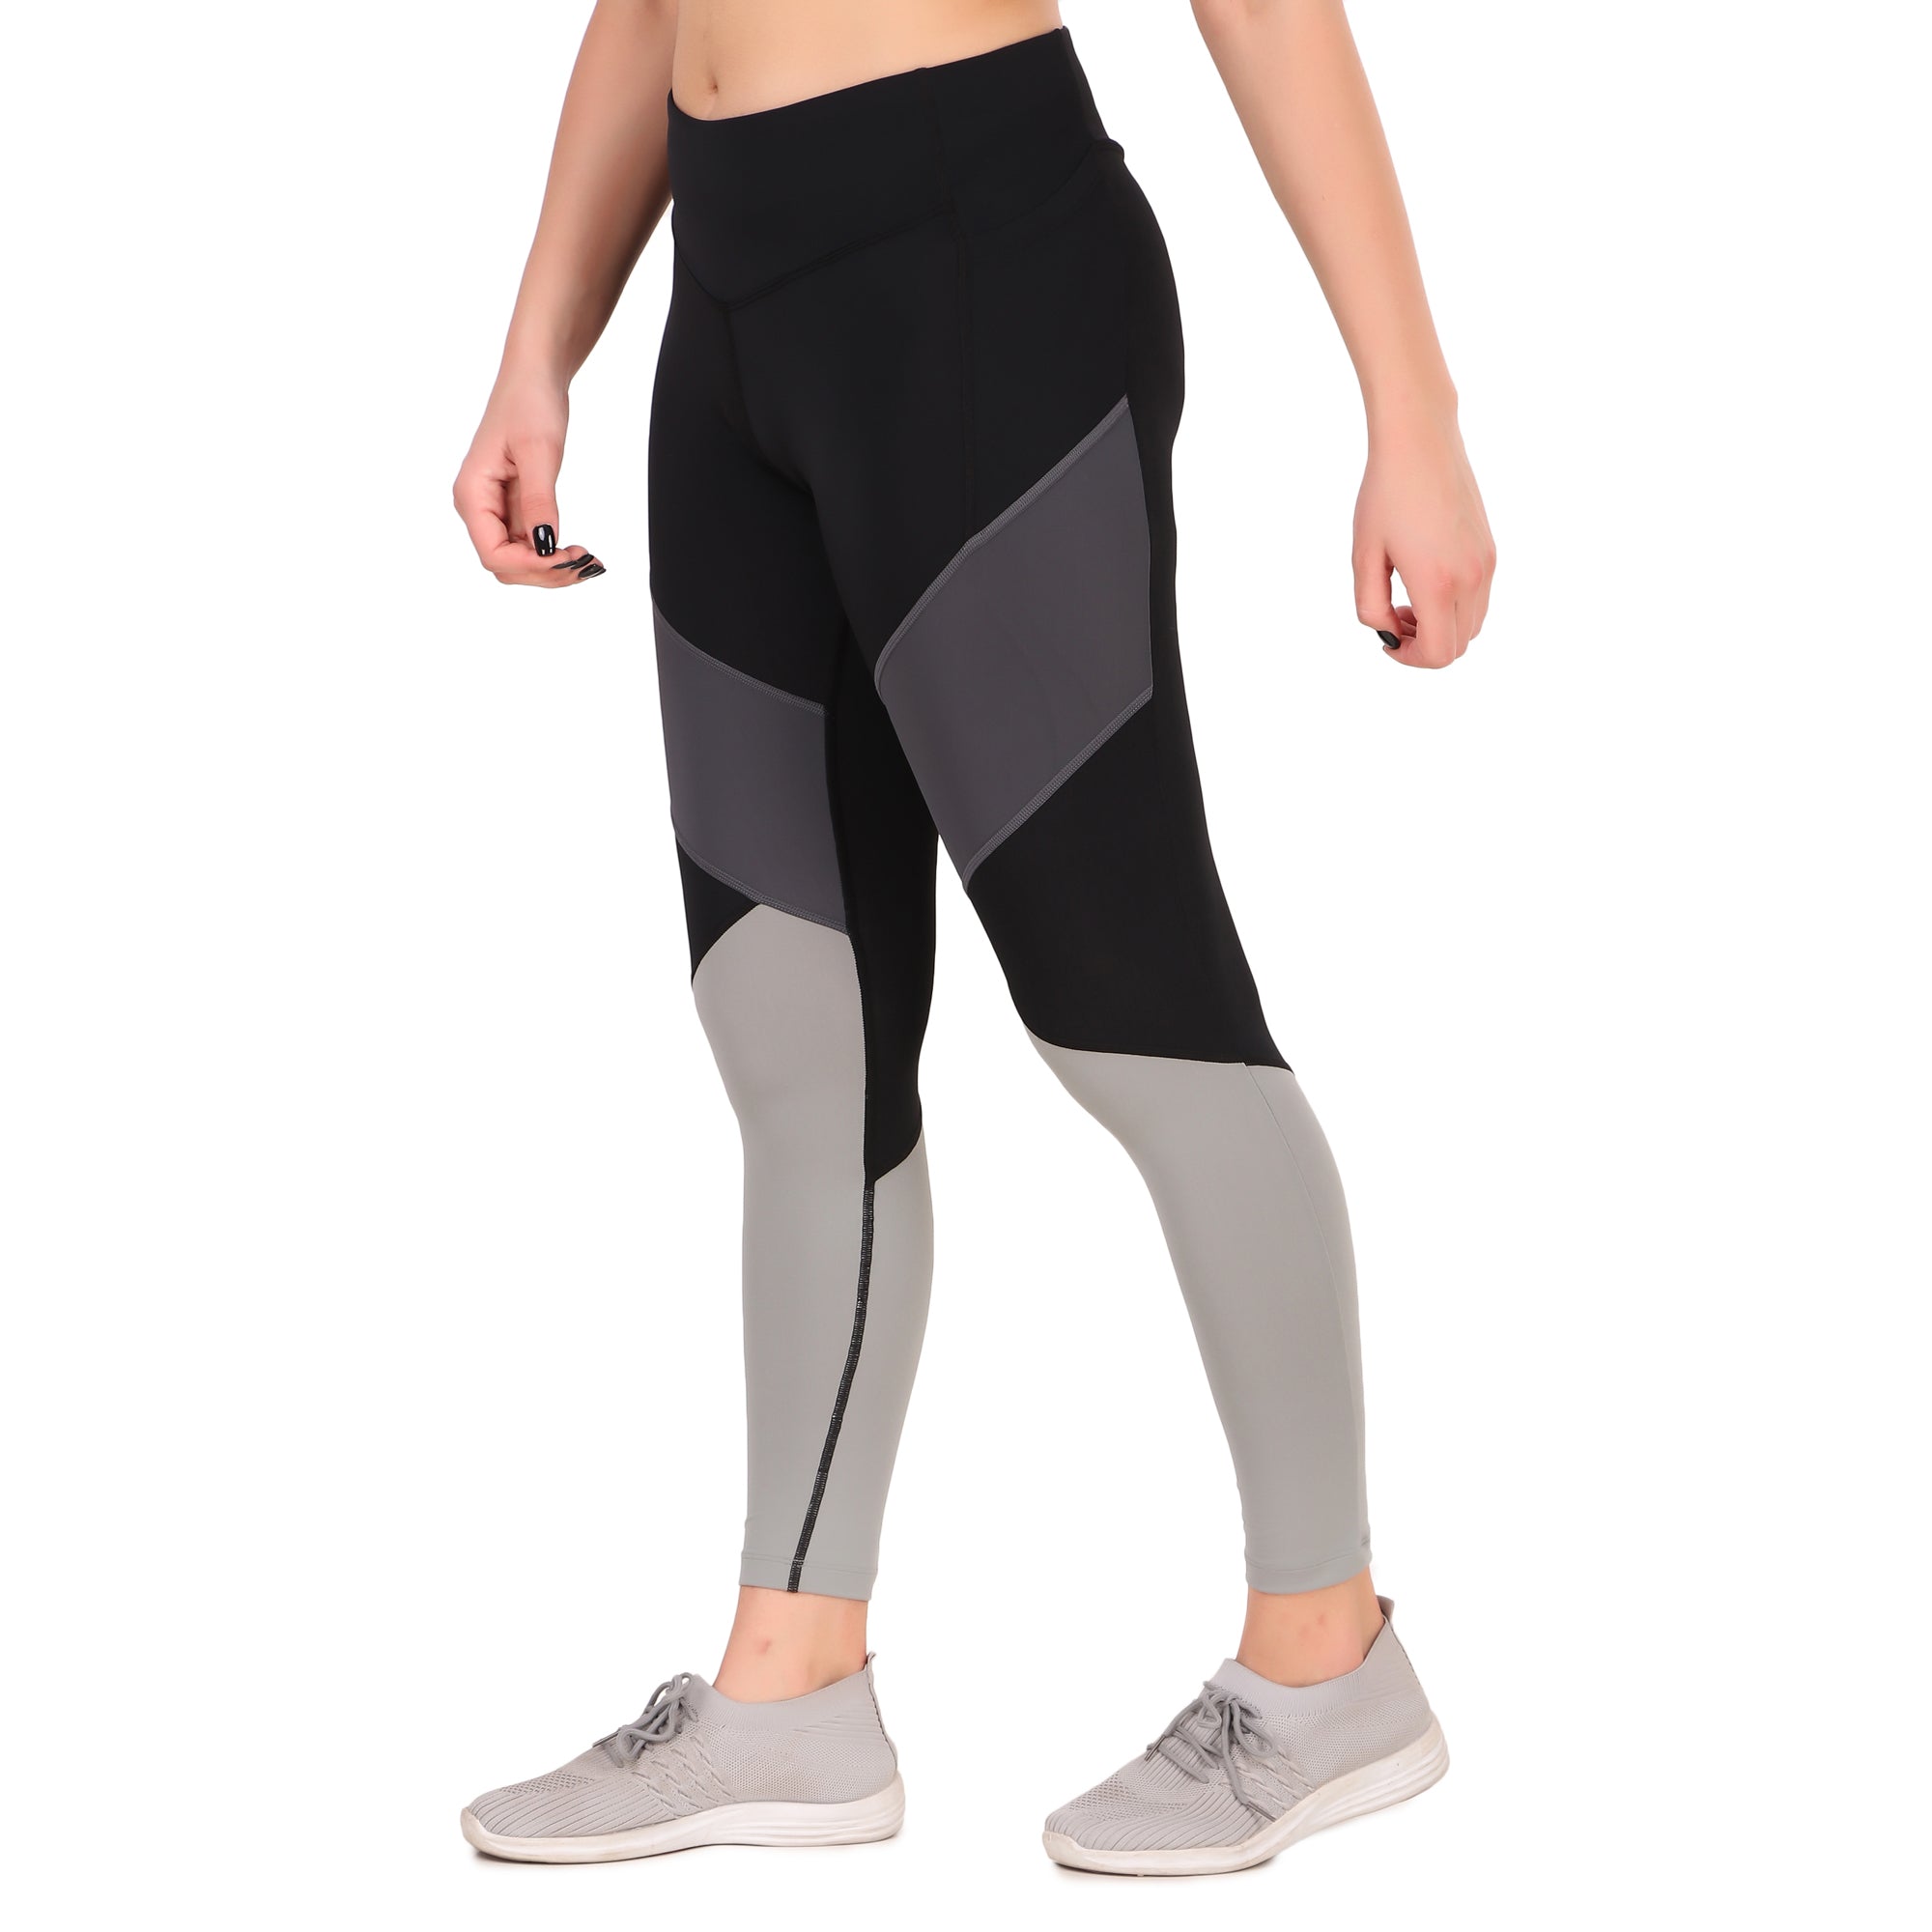 Nylon Compression Legging/Tights For Women (BK/DGRY/LGRY)